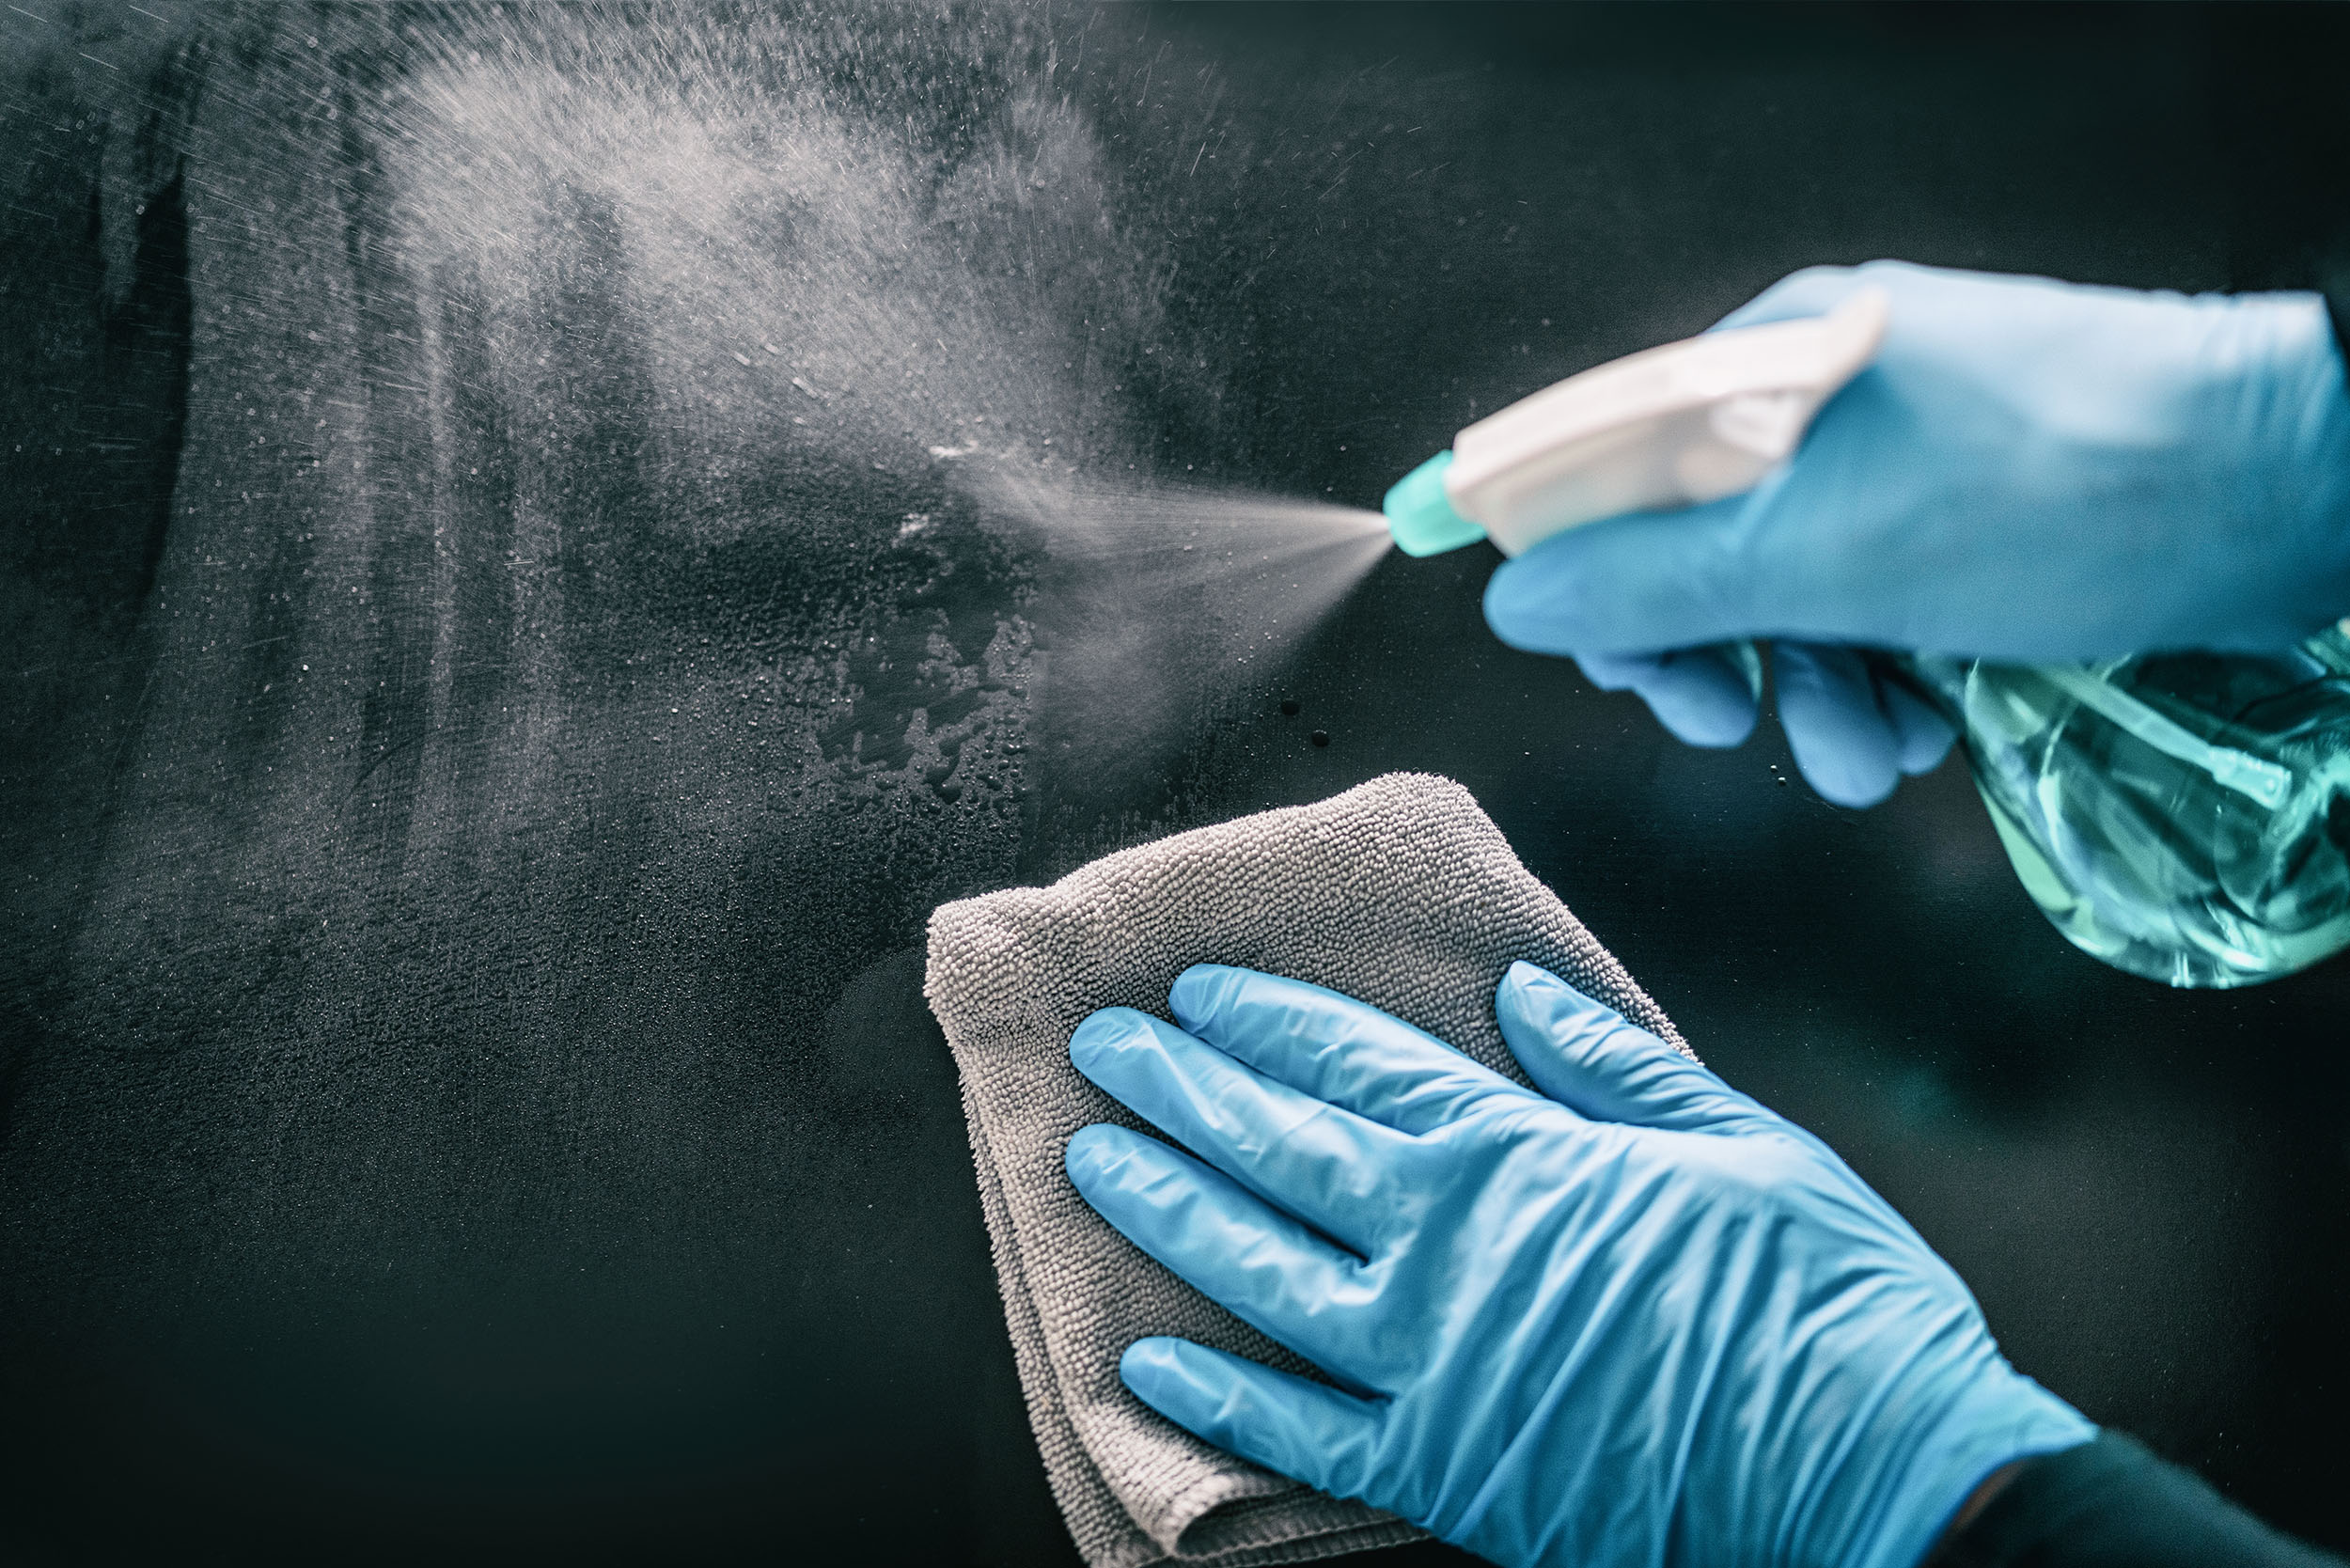 Image of someone cleaning and disinfecting a surface